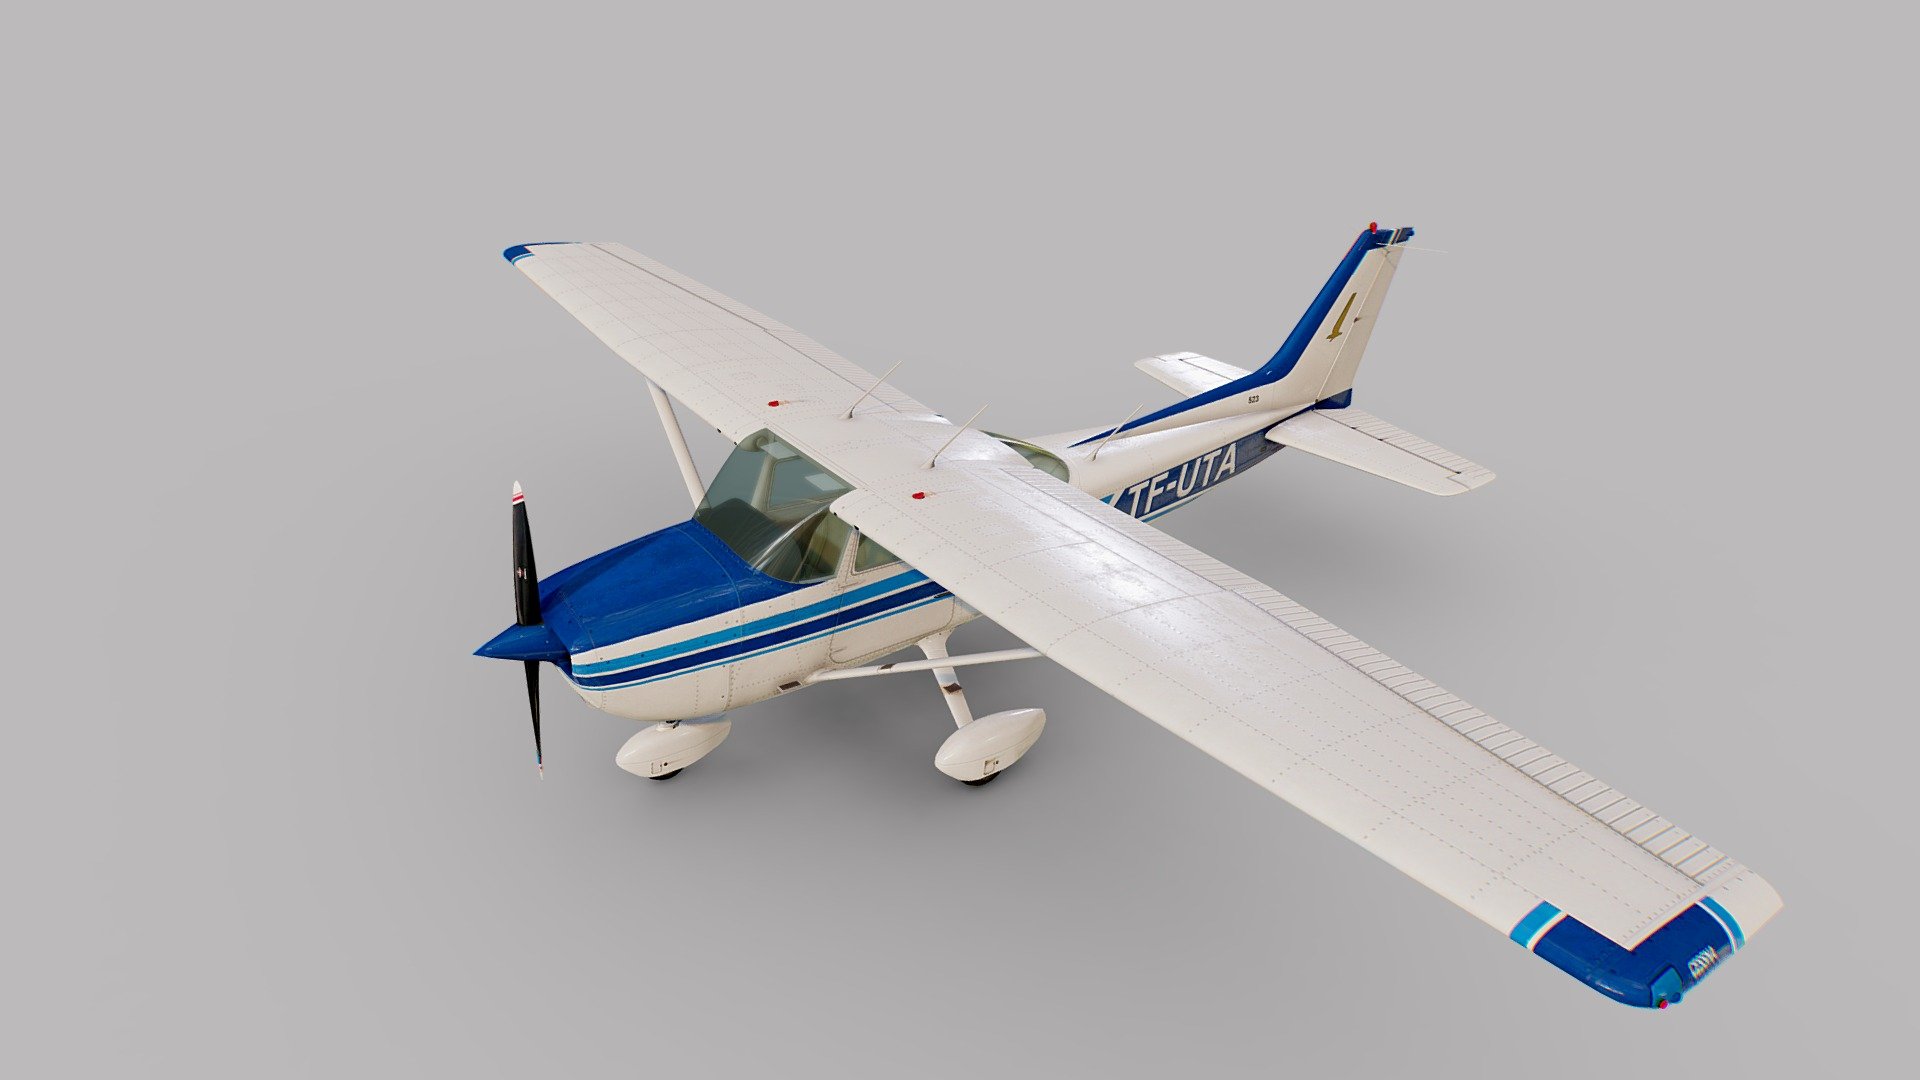 The Cessna 172 Skyhawk is an American four-seat, single-engine, high-wing, fixed-wing aircraft made by the Cessna Aircraft Company. Prepared for AAA quality game projects and highly optimized for virtual reality and augmented reality

You may also like: https://sketchfab.com/3d-models/tank-t72-e415f62fa428411f9ab5d851dd40183a

To learn more about products &amp; services go to:
Website: http://www.dreamerzlab.com
Like, Subscribe &amp; Follow:
Facebook: https://www.facebook.com/dreamerzlab
YouTube: https://www.youtube.com/channel/UCBxy&hellip;
Linkedin: https://www.linkedin.com/company/drea&hellip;
Twitter: https://twitter.com/dreamerz_lab
Instagram: https://www.instagram.com/dreamerzlabltd
Email: info@dreamerzlab.com 
Call: +8801675110479 - Cessna-172 Aircraft - 3D model by Dreamerz Lab (@dreamerzlab) 3d model